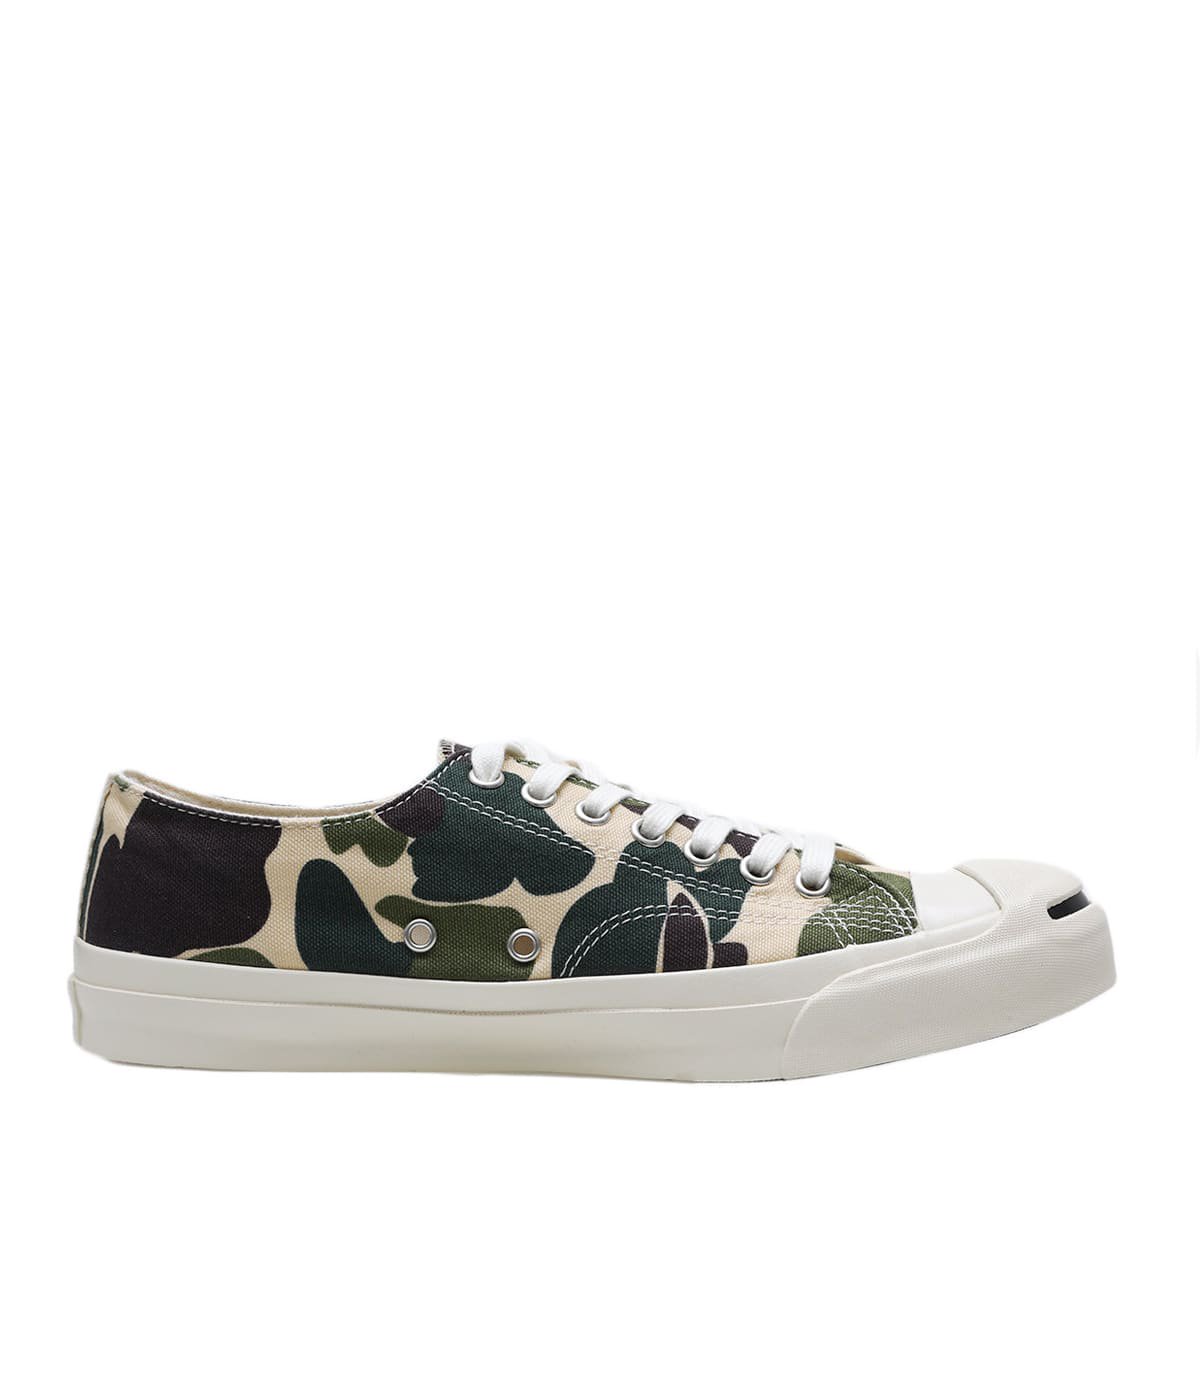 JACK PURCELL US 83CAMO